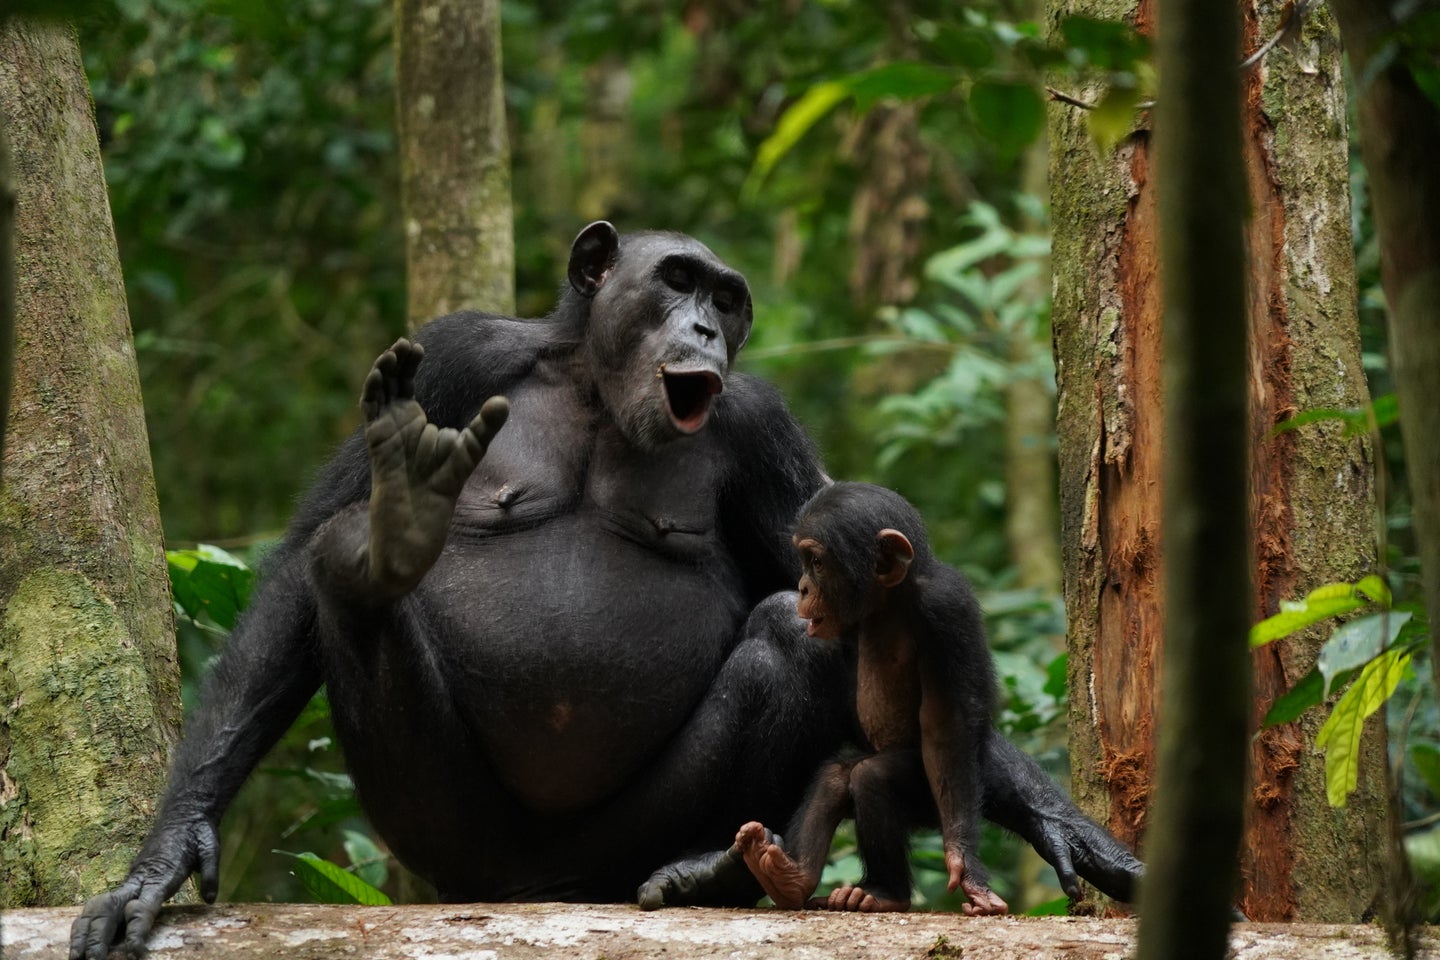 A chimpanzee sitting with a baby between her leg. Her mouth is open to yell.